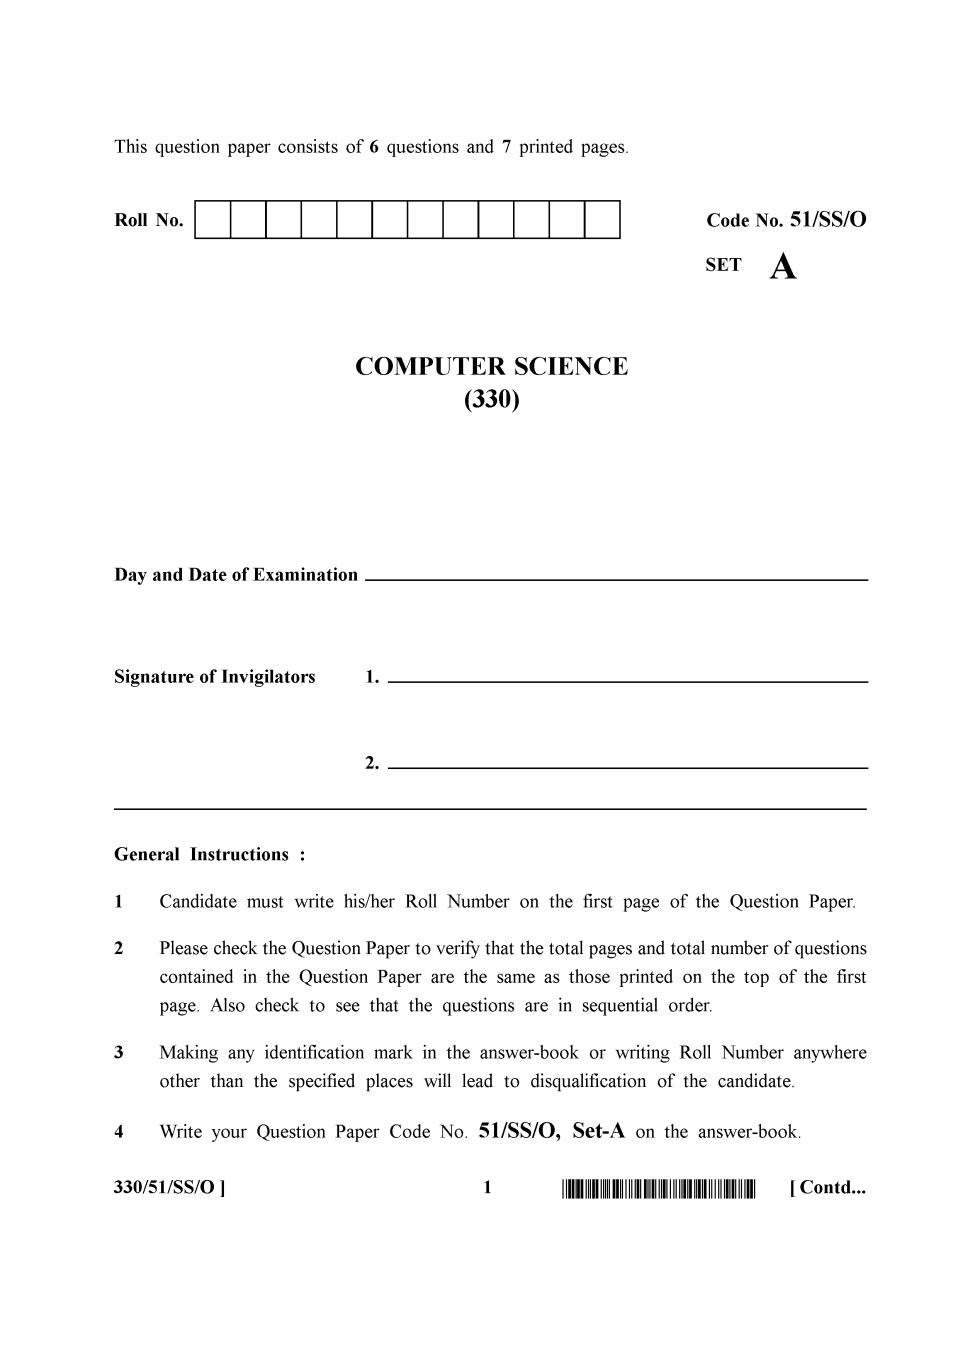 NIOS Class 12 Question Paper Oct 2015 - Computer Science - Page 1